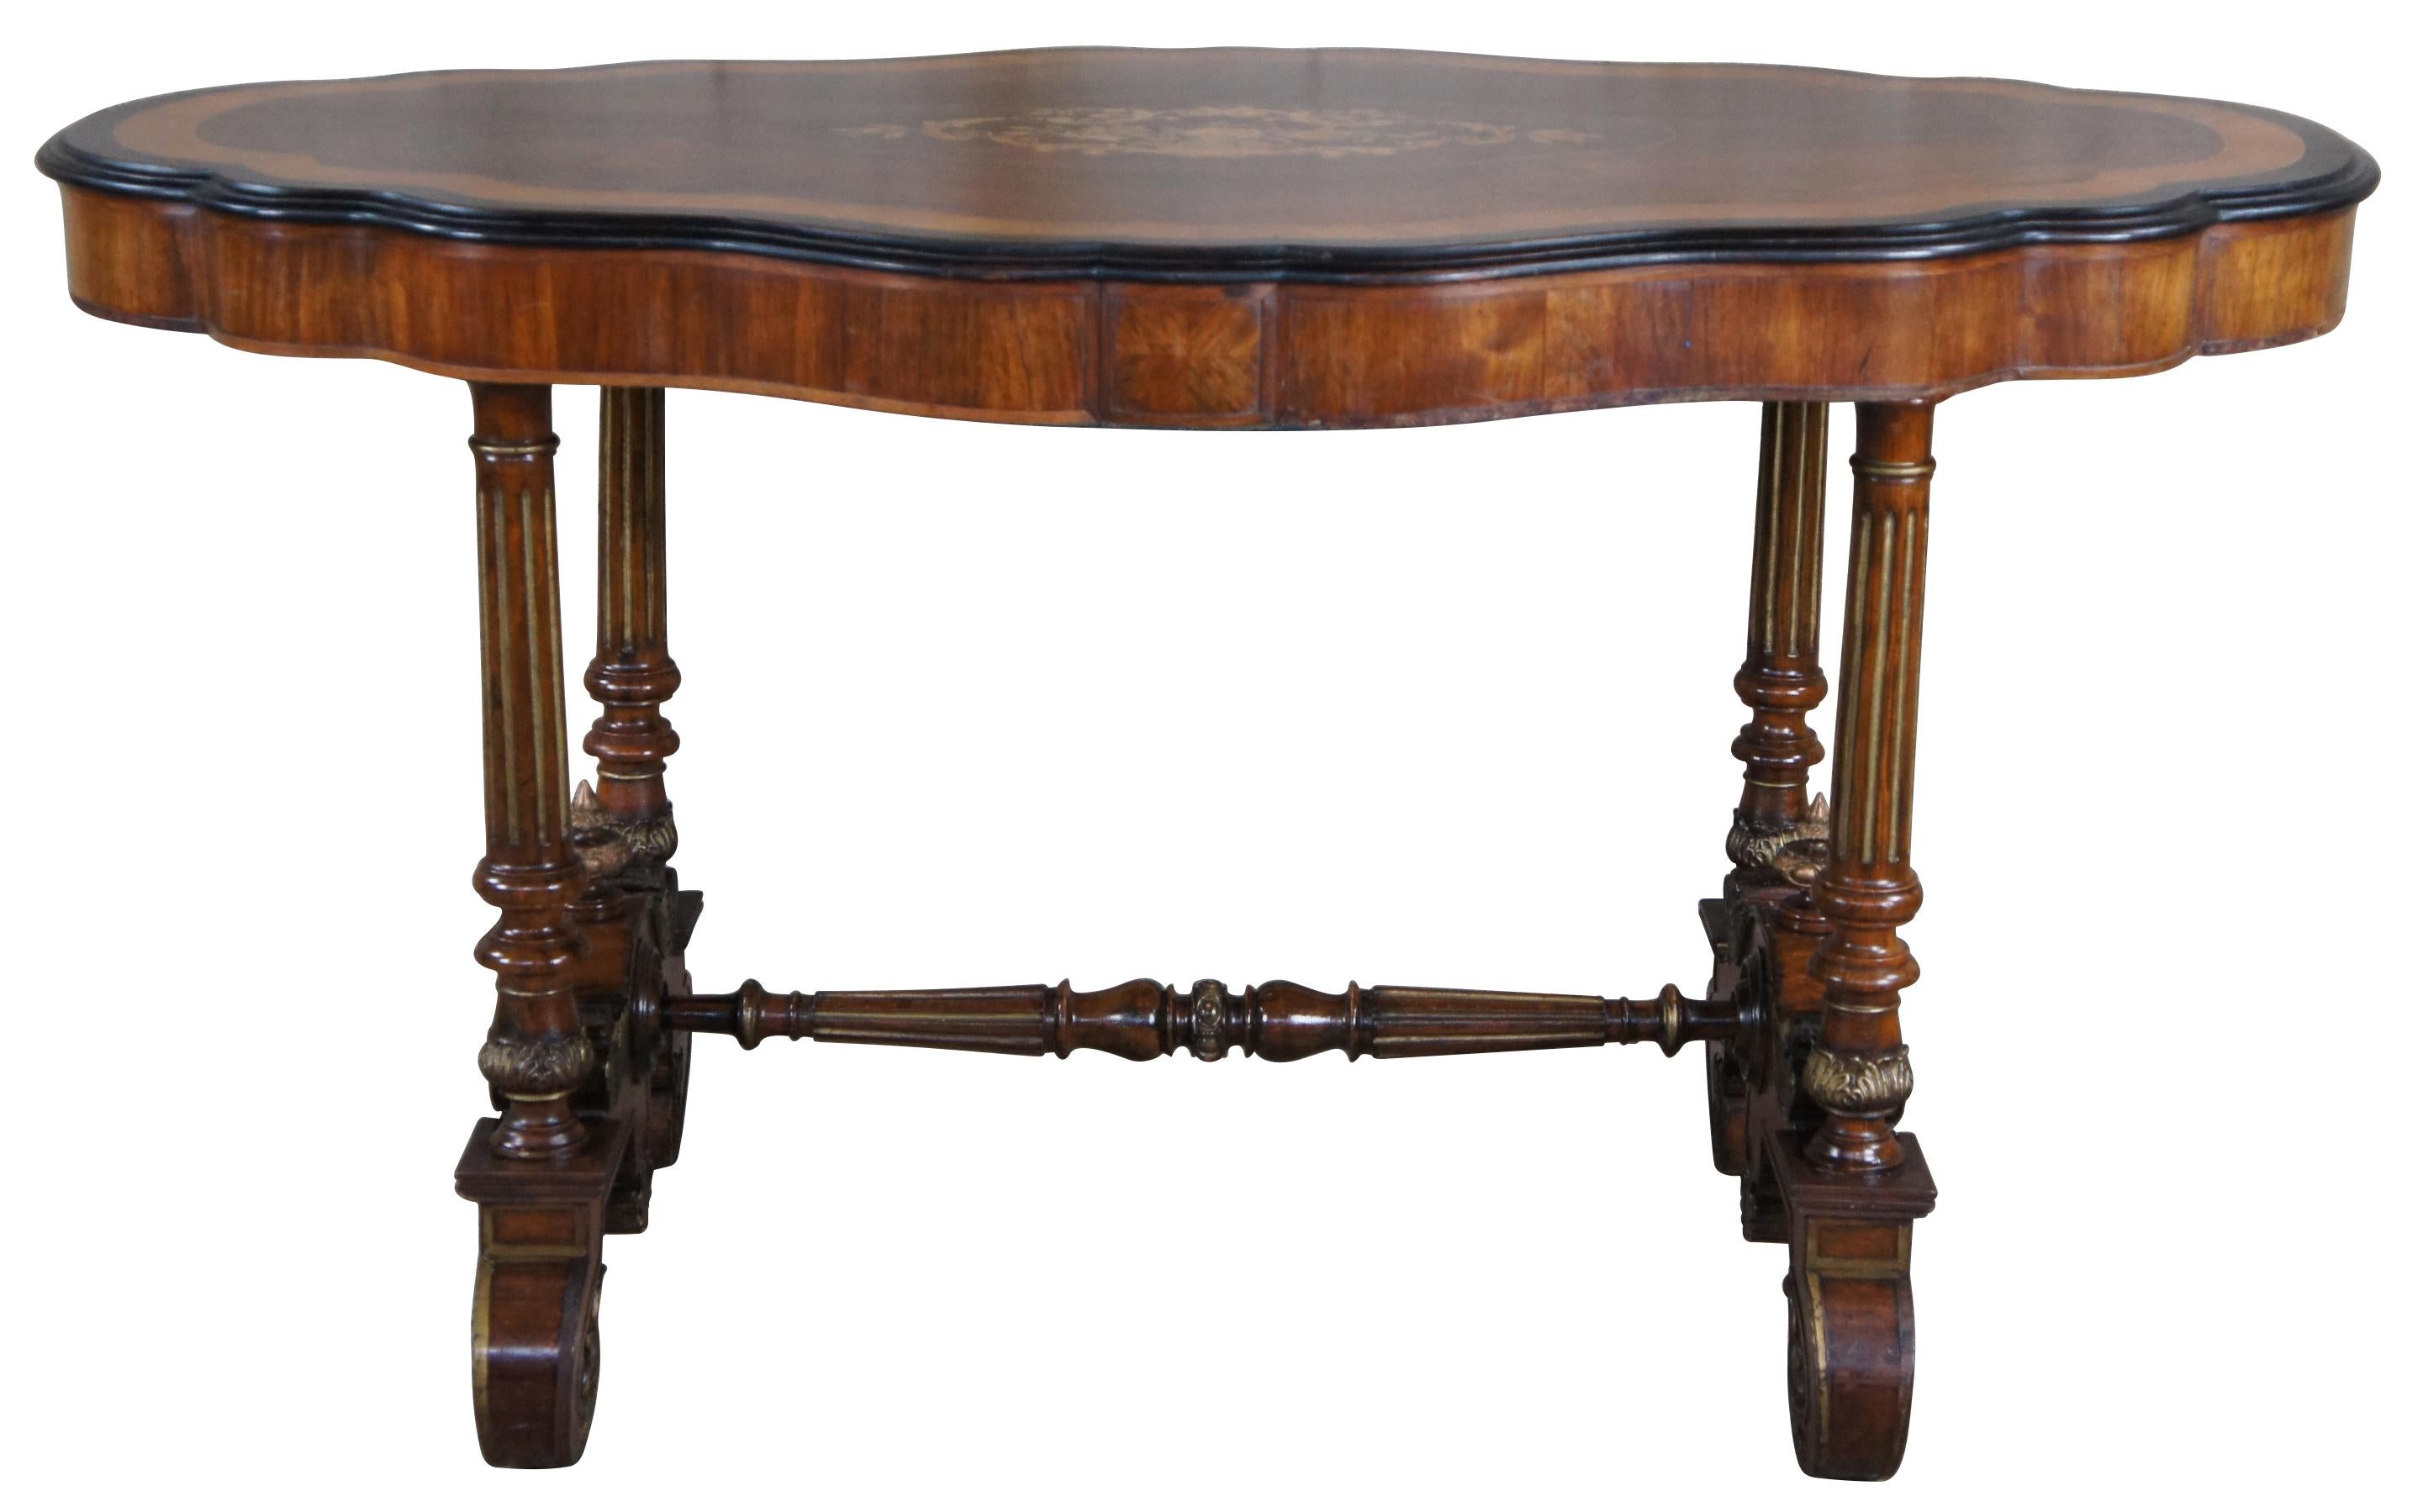 An exceptional American Renaissance Revival center table, circa late 19th century. Features a serpentine form with walnut burl top centered by floral marquetry, inlay and banding. The table is supported by turned and fluted columns leading to an